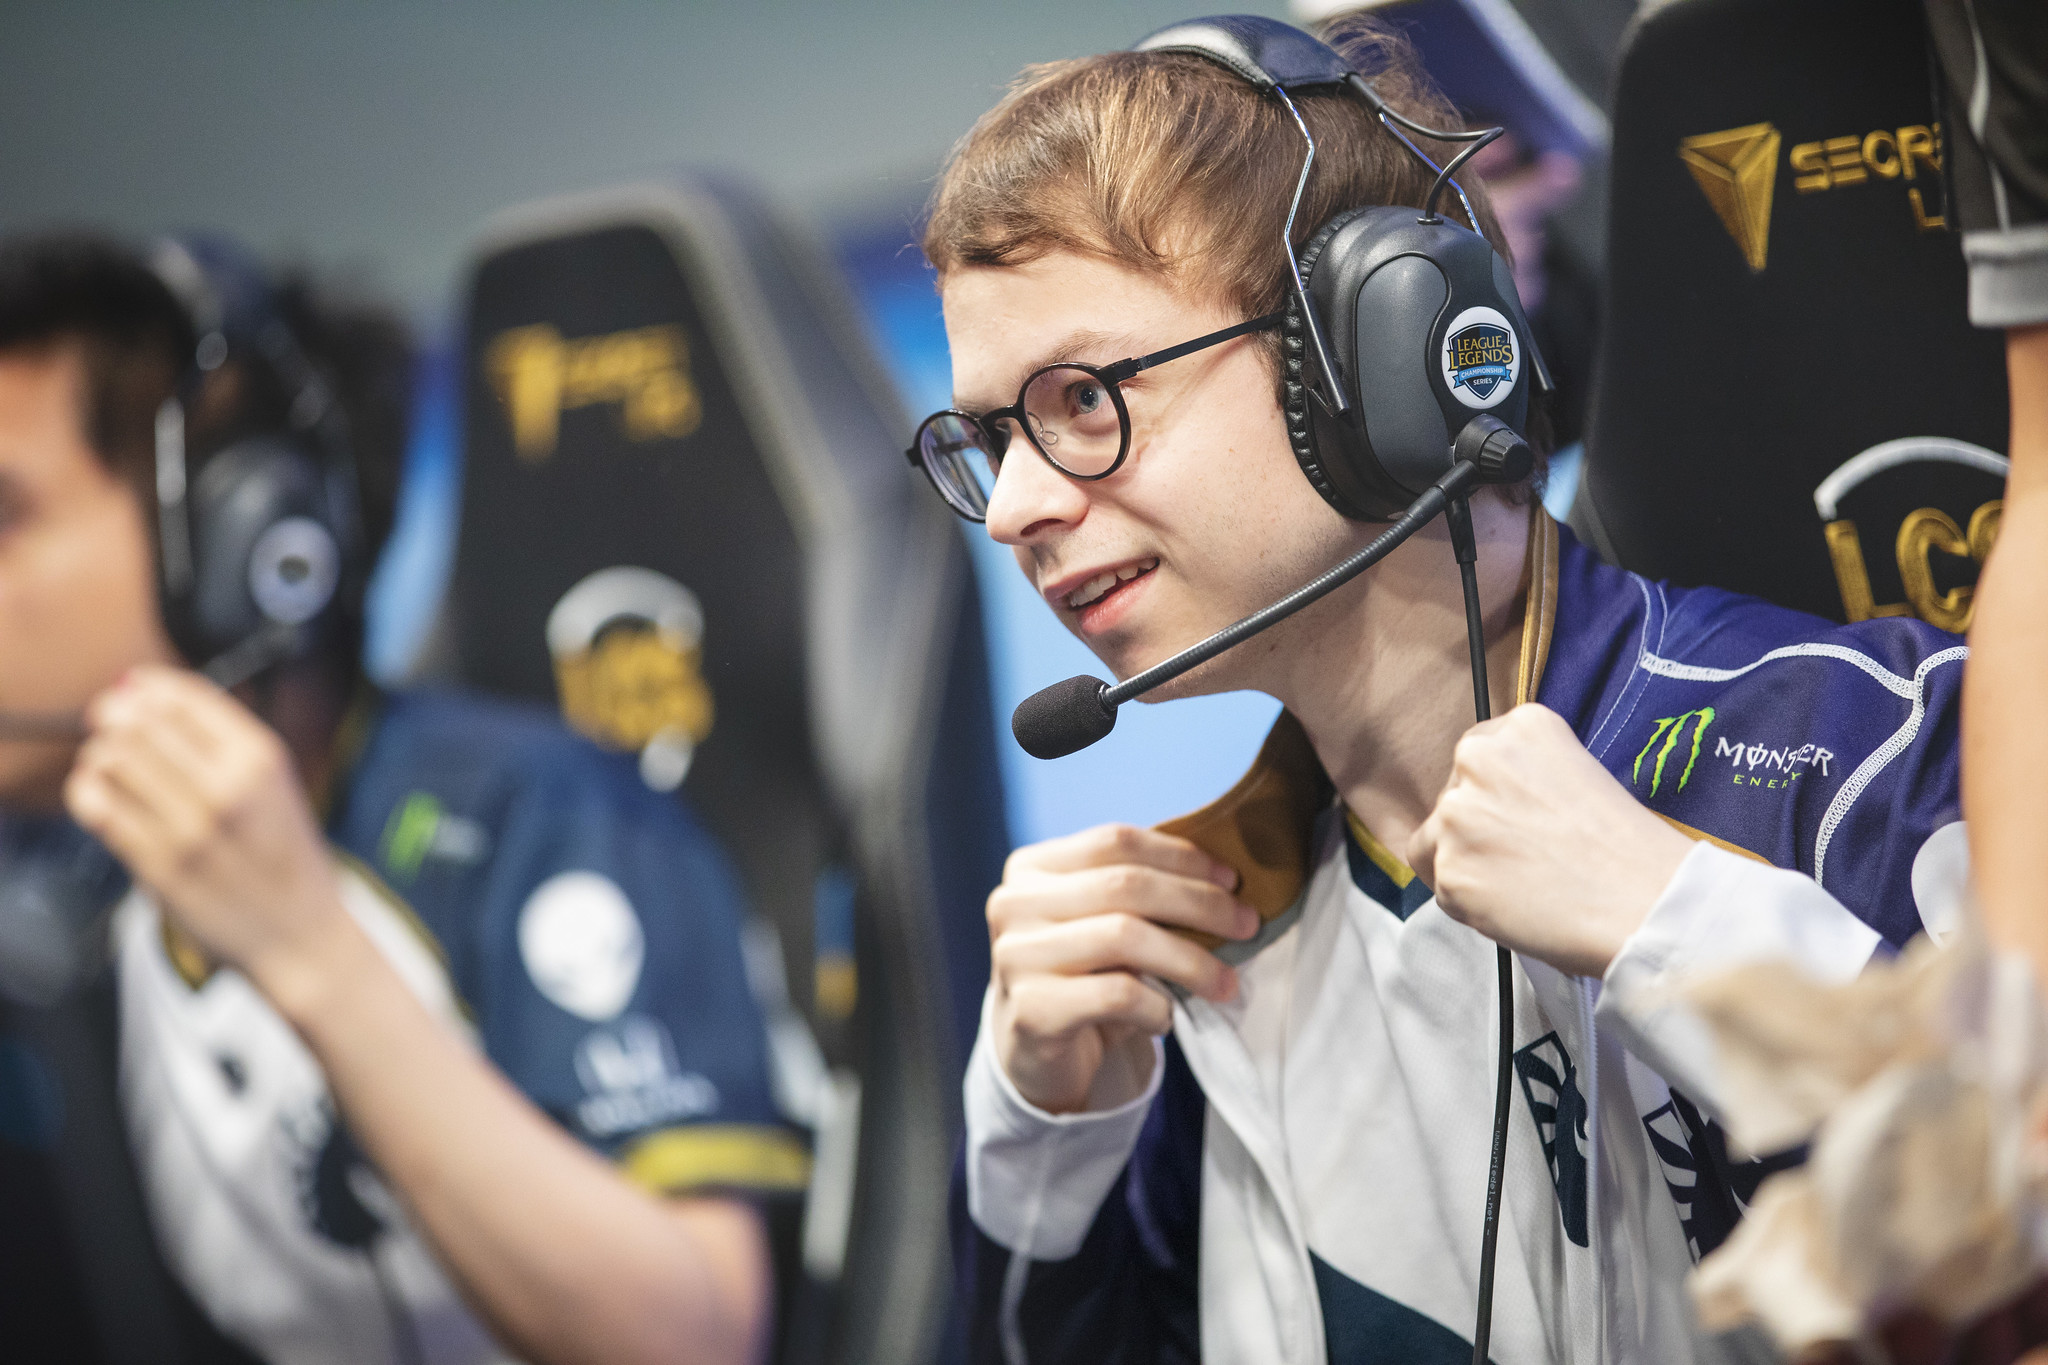 Jensen's 4.2 million dollar deal crowns him as one of the highest paid players in the LCS